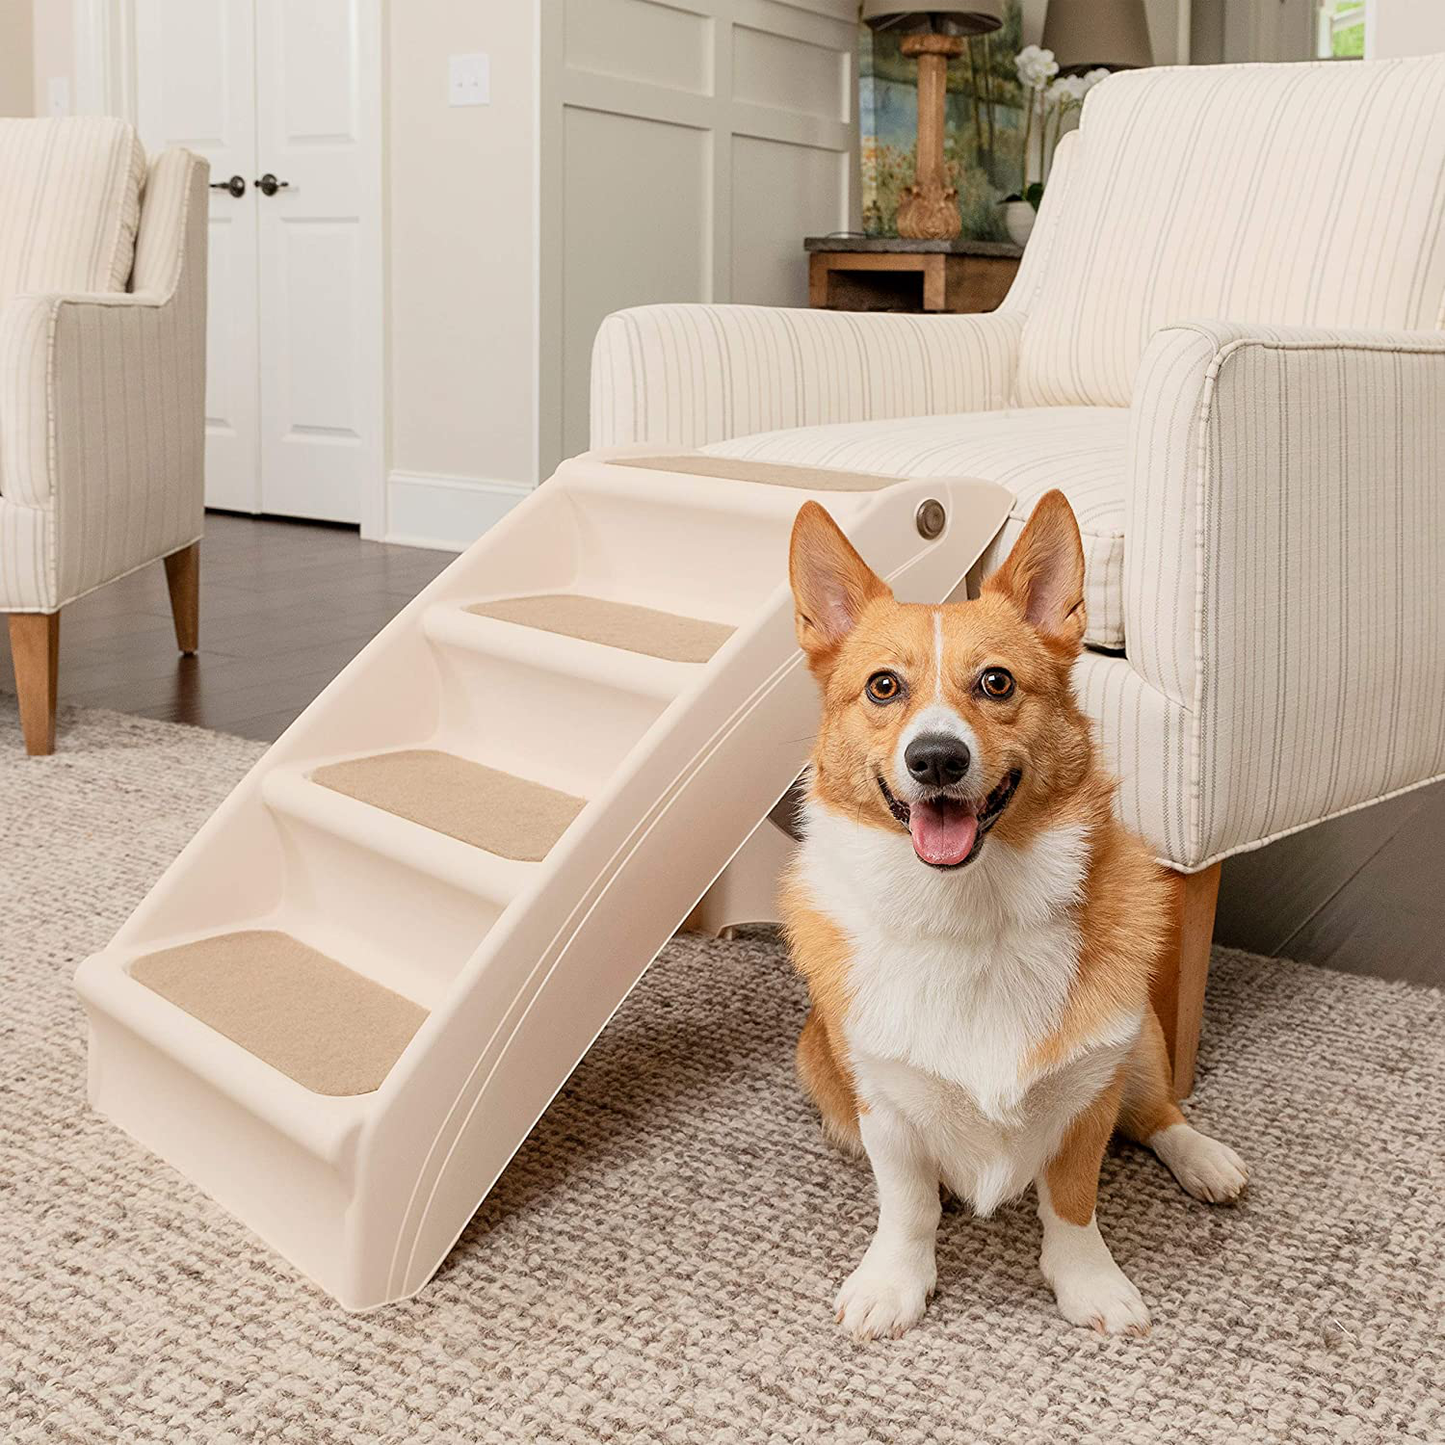 Petsafe Cozyup Folding Pet Steps - Pet Stairs for Indoor/Outdoor at Home or Travel - Dog Steps for High Beds - Dog Stairs with Siderails, Non-Slip Pads - Durable, Support up to 150 Lbs - Large, Tan Animals & Pet Supplies > Pet Supplies > Cat Supplies > Cat Beds Radio Systems Corporation Tan Pet Steps - Standard 